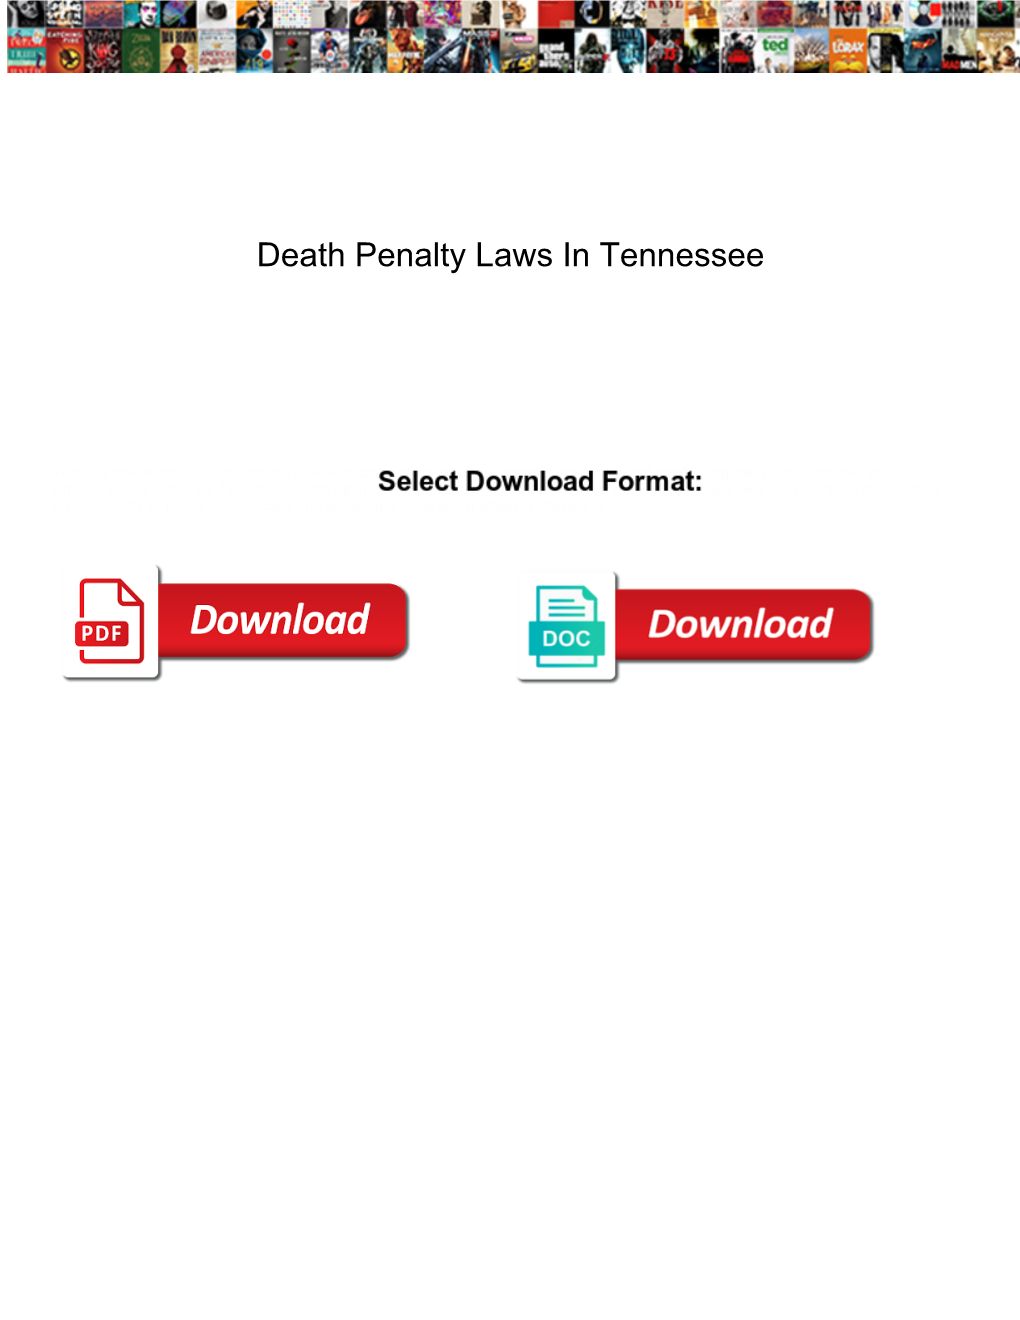 Death Penalty Laws in Tennessee